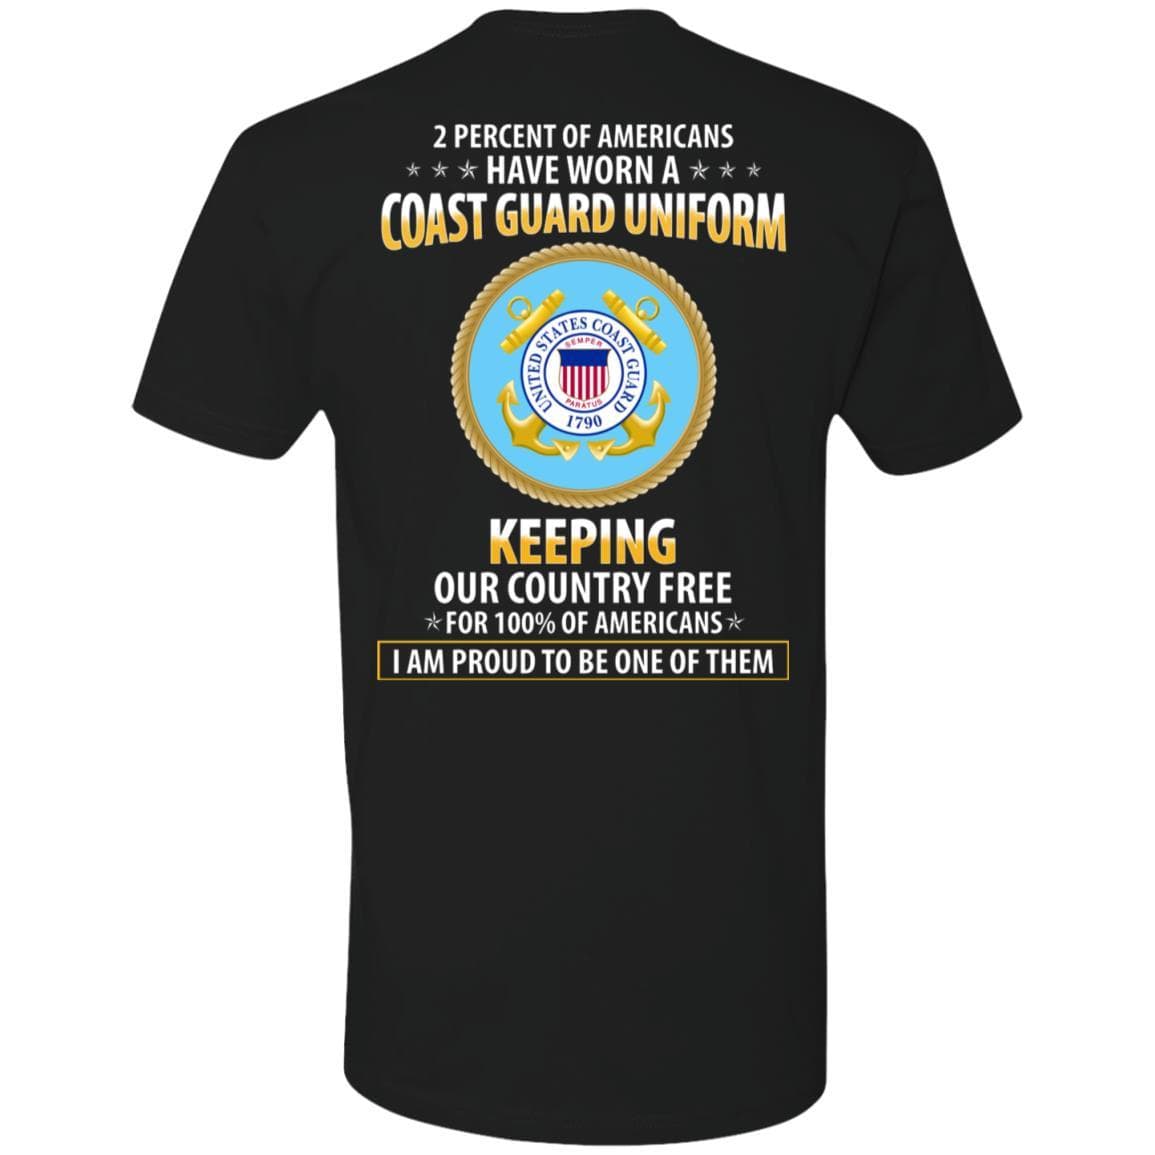 2 percent of Americans have worn a Coast Guard Uniform, keeping our country free, I am proud to be one of them – Next Level Premium T-Shirt On Back